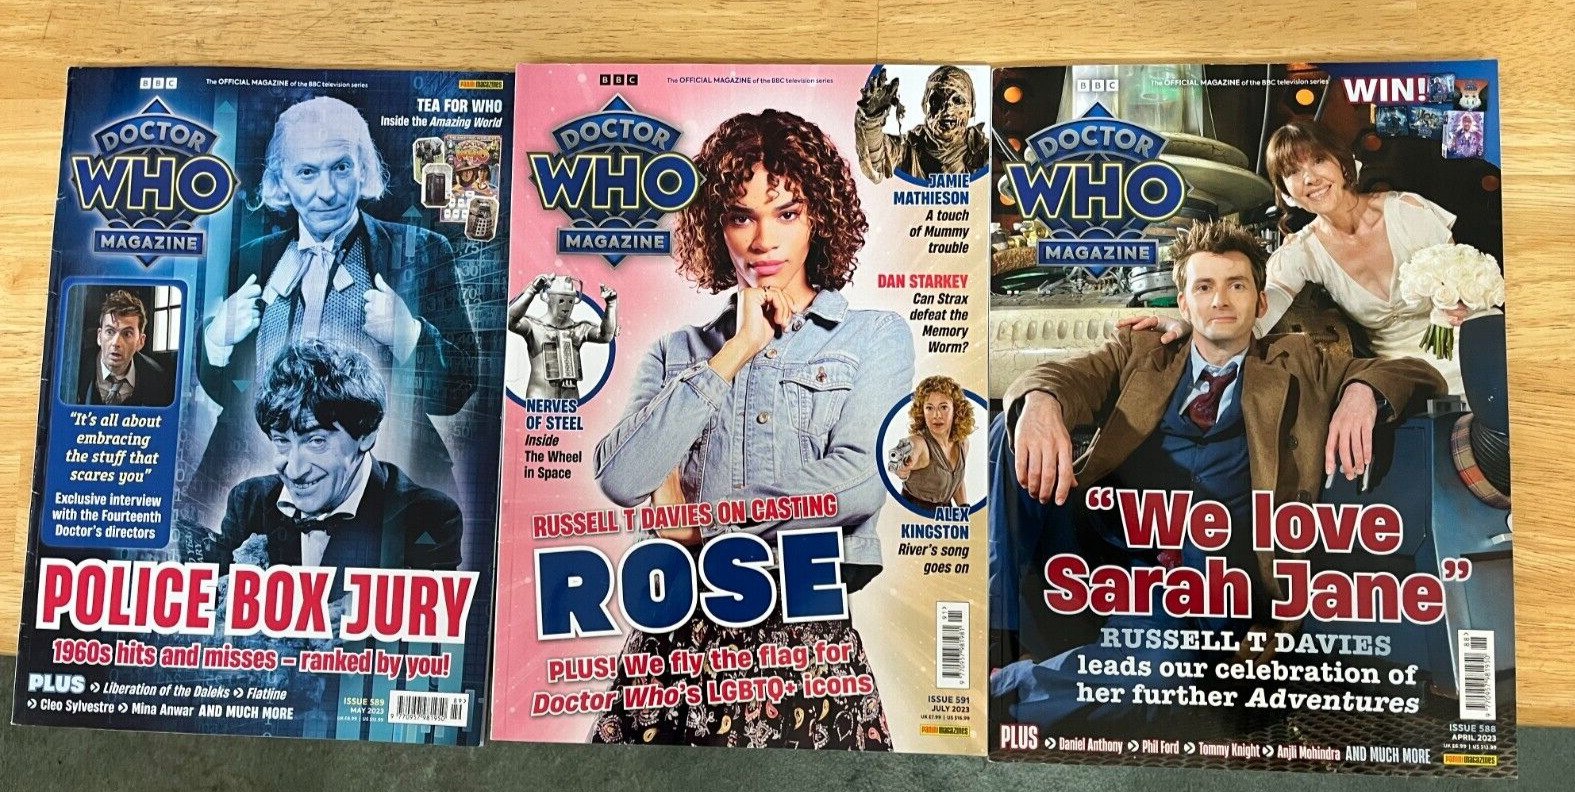 3 Doctor Who Magazines | Issue 589, 591, 588 From The BBC Tom Baker David Tenant